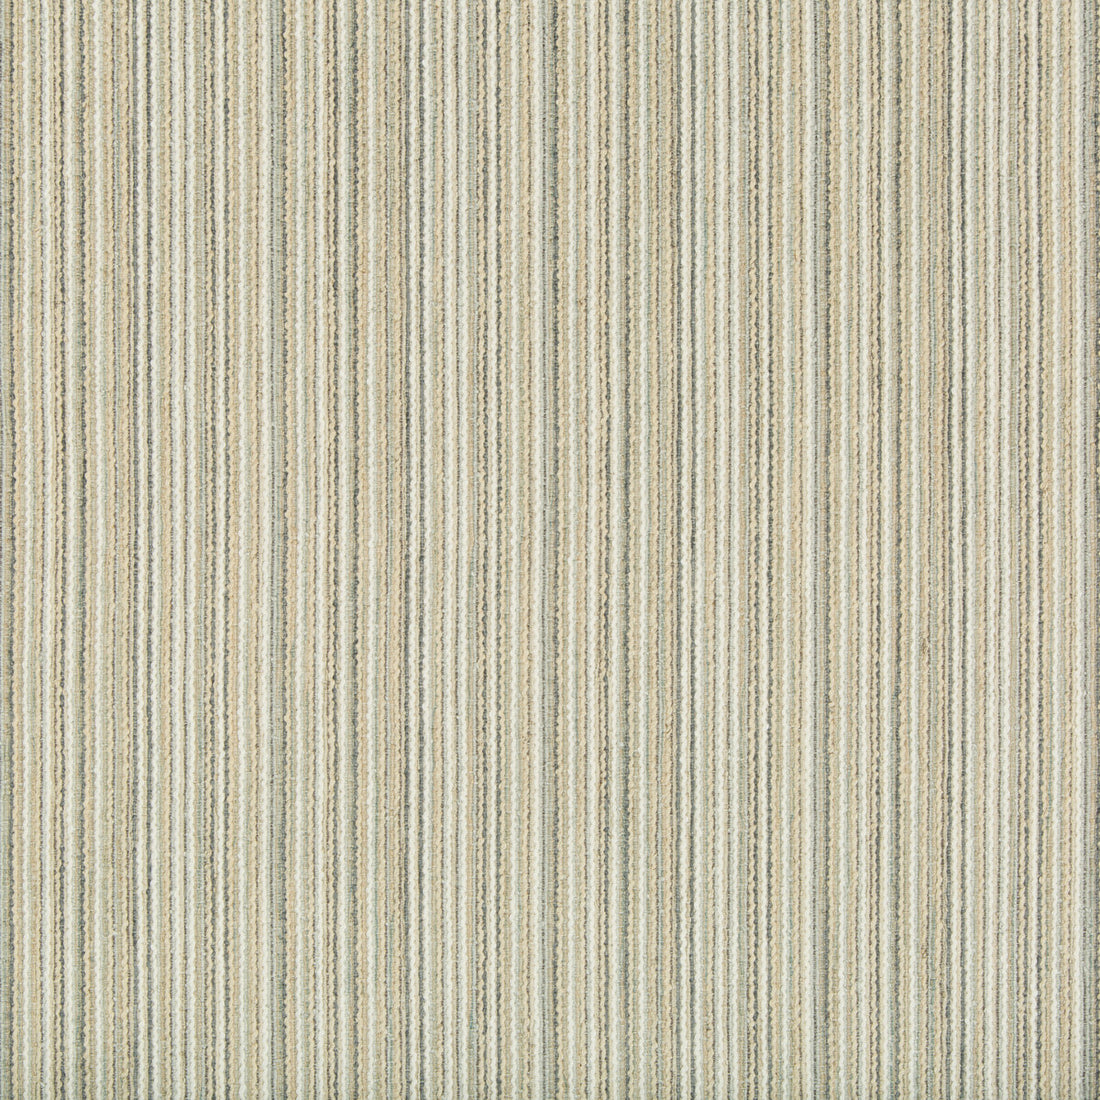 Kravet Contract fabric in 35033-1615 color - pattern 35033.1615.0 - by Kravet Contract in the Incase Crypton Gis collection